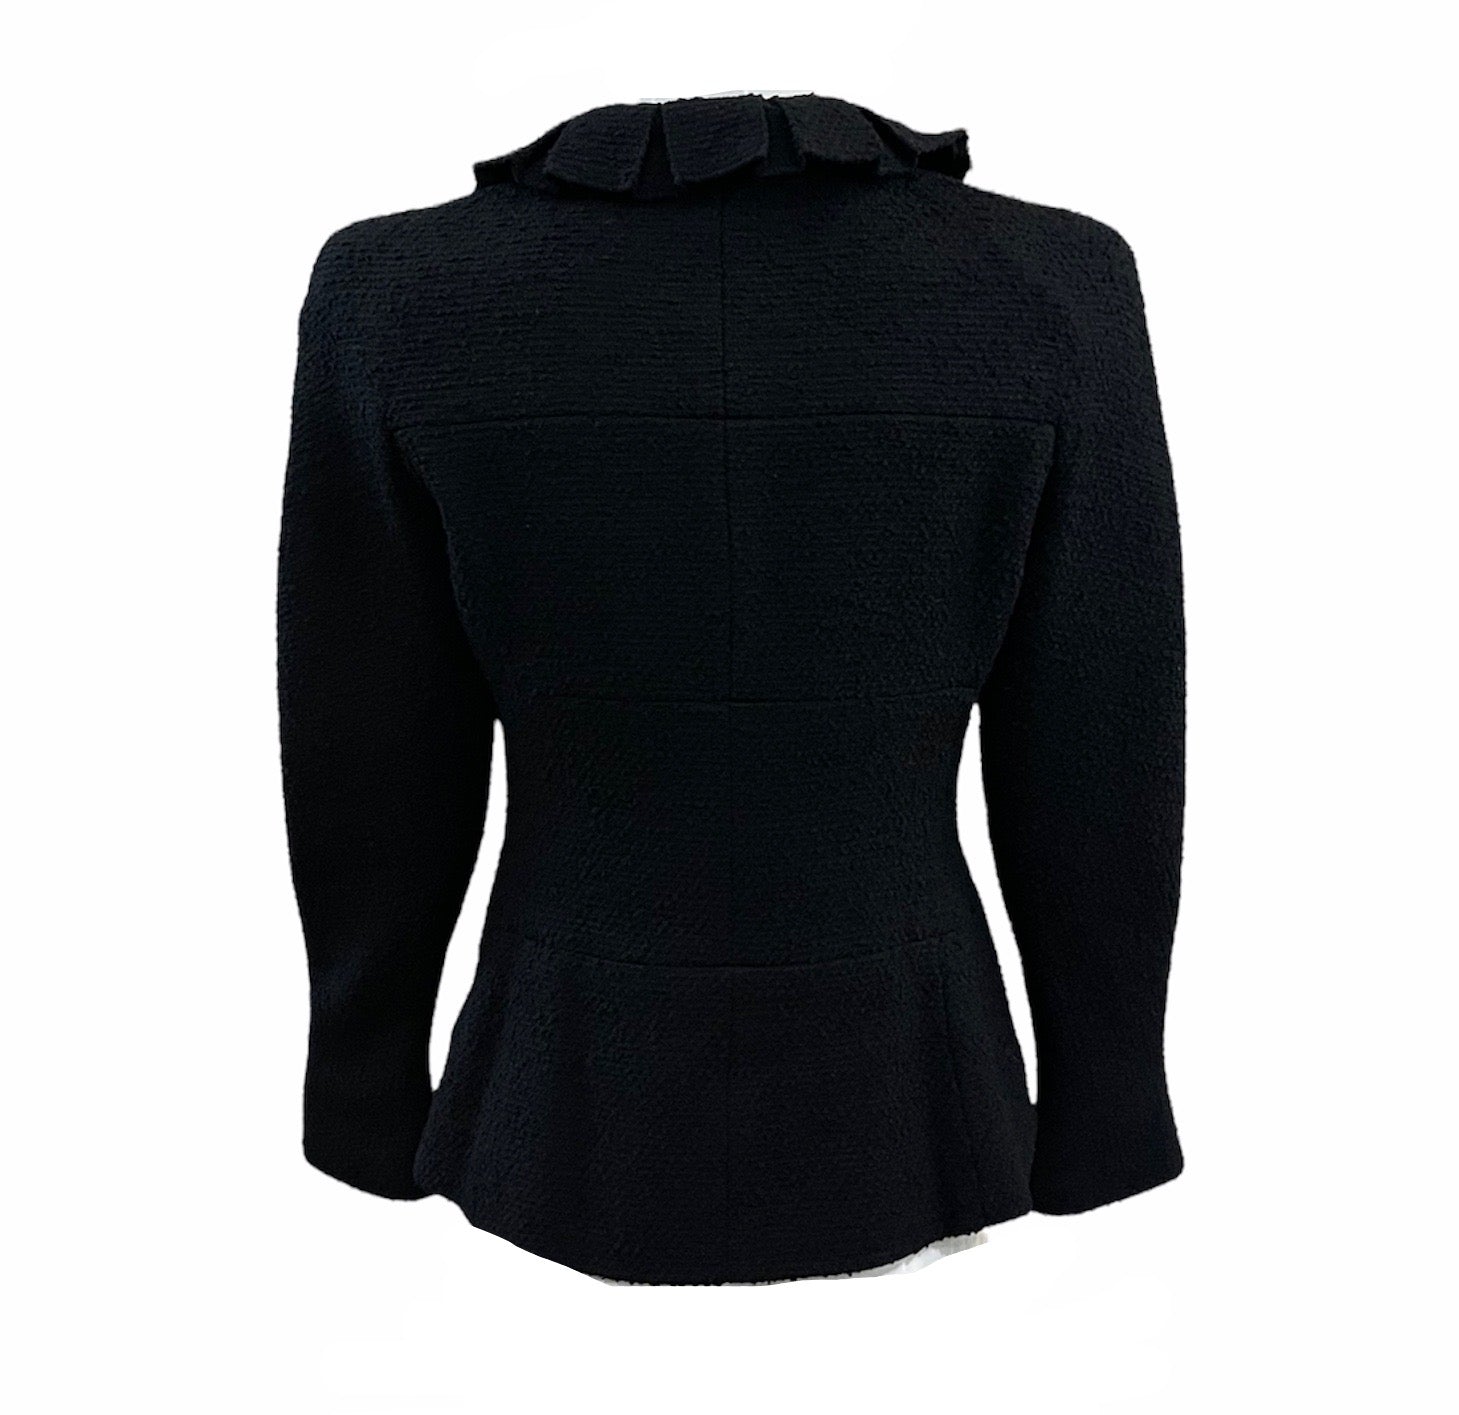 Chanel Contemporary Black Boucle Suit   JACKET BACK 4 of 8